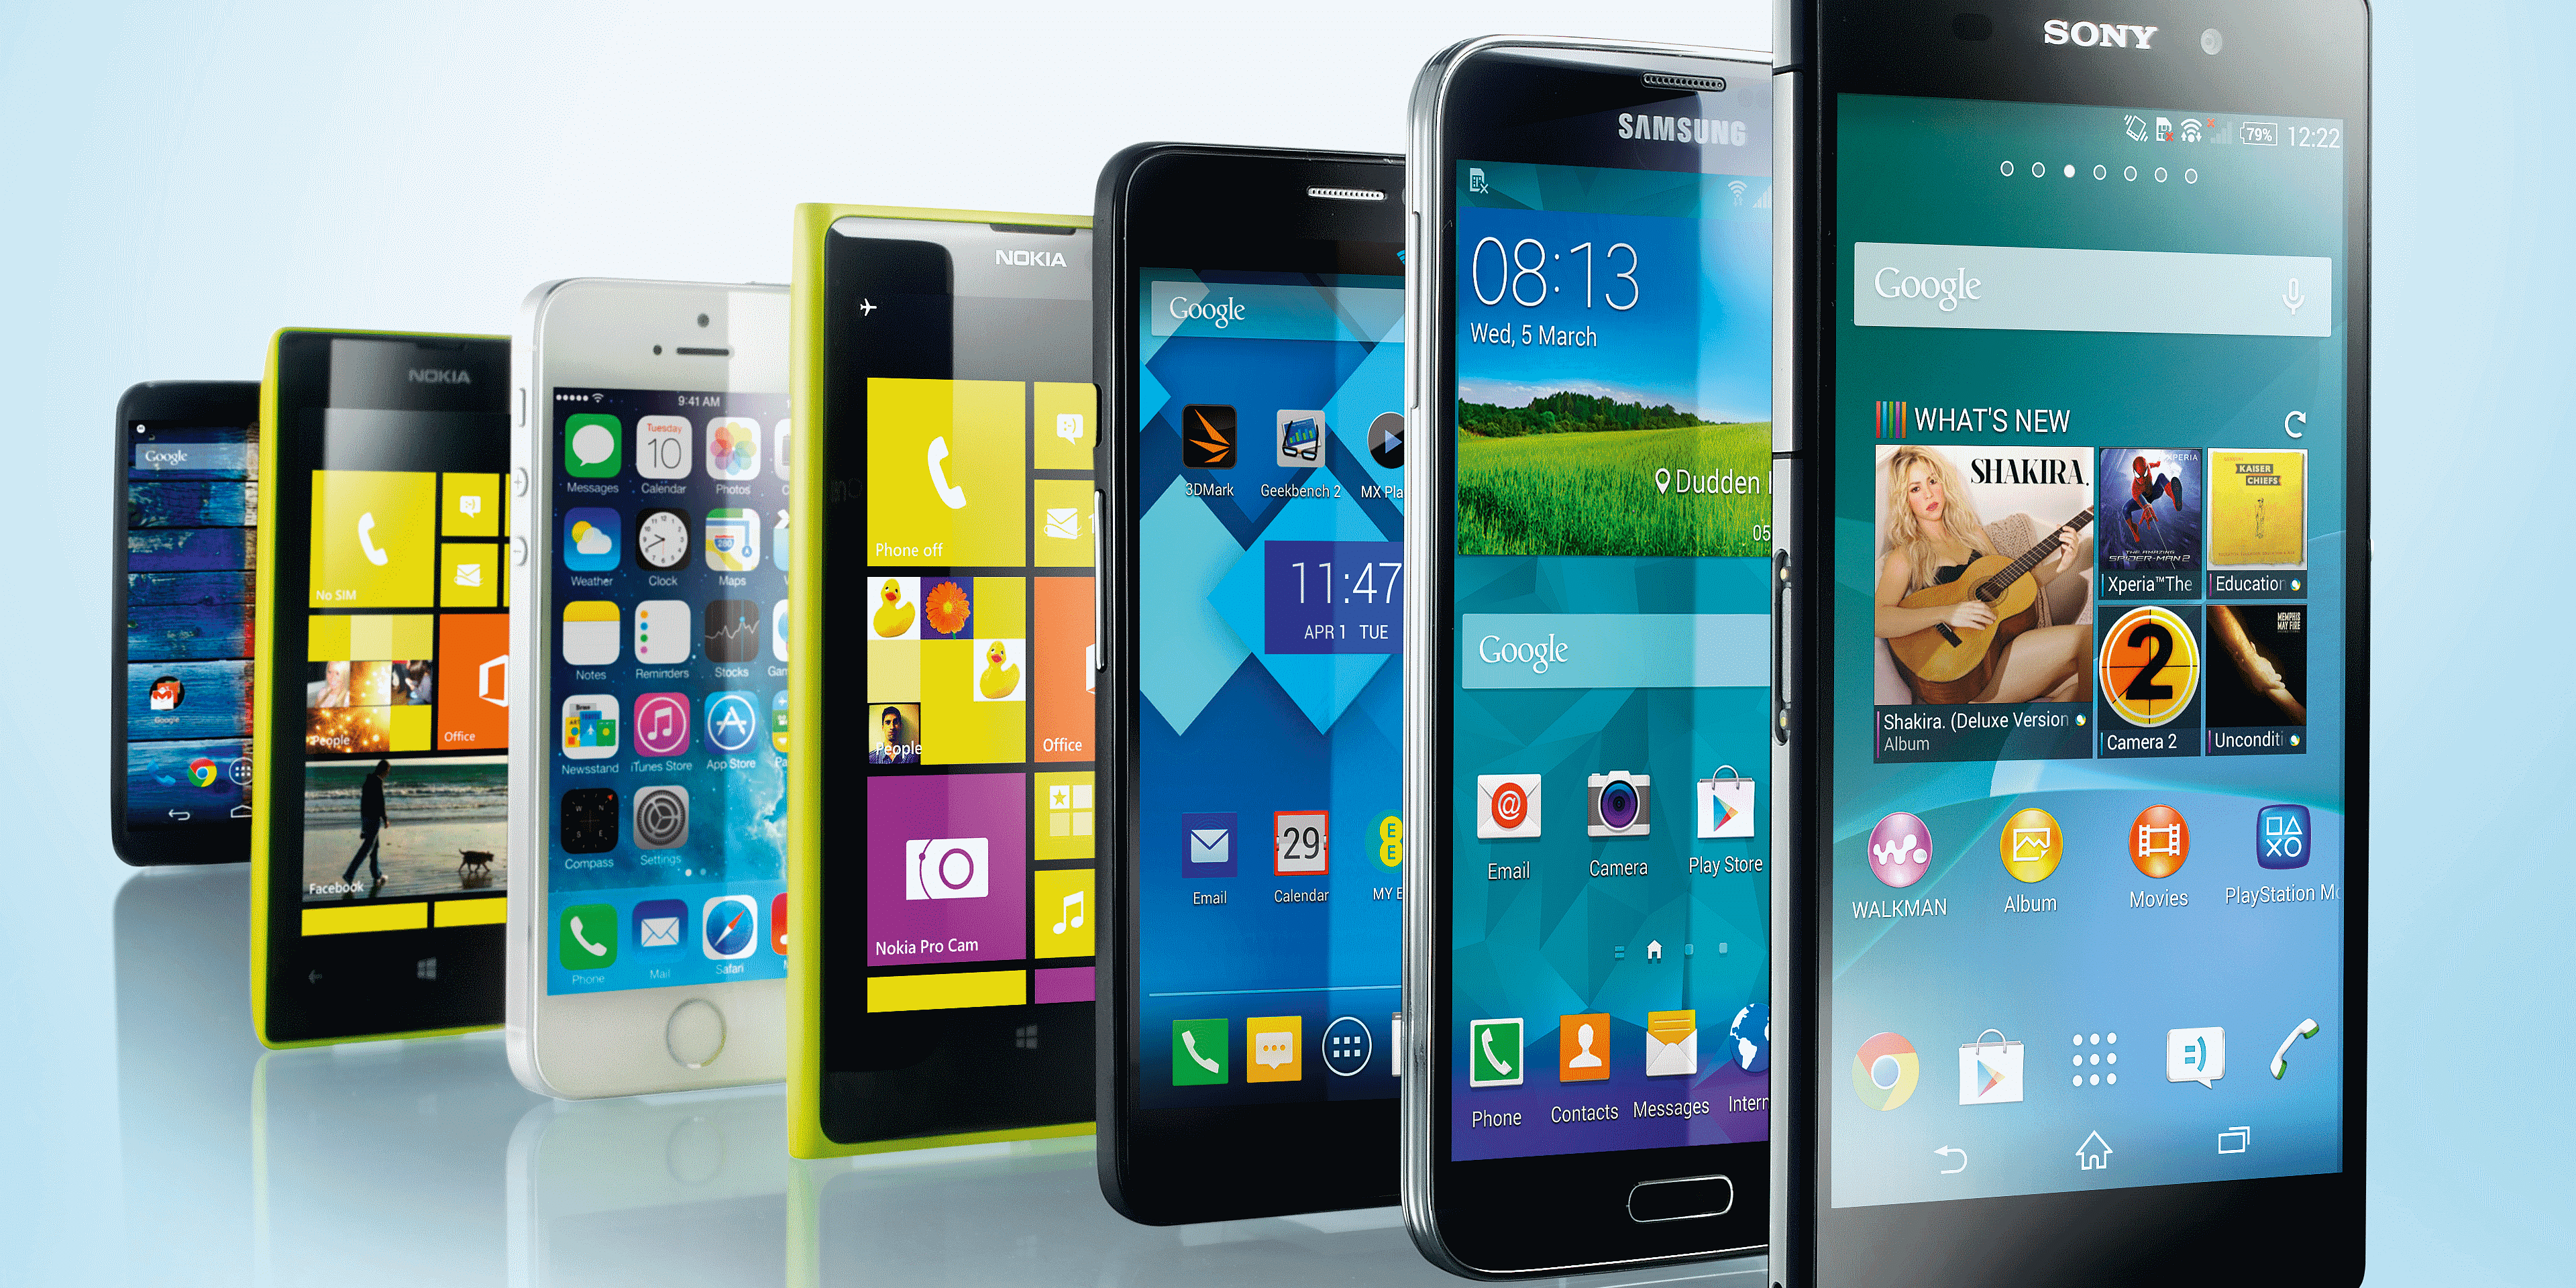 Smartphone shipment touches 38M units in Q1, COVID wave may dampen sentiment: Counterpoint